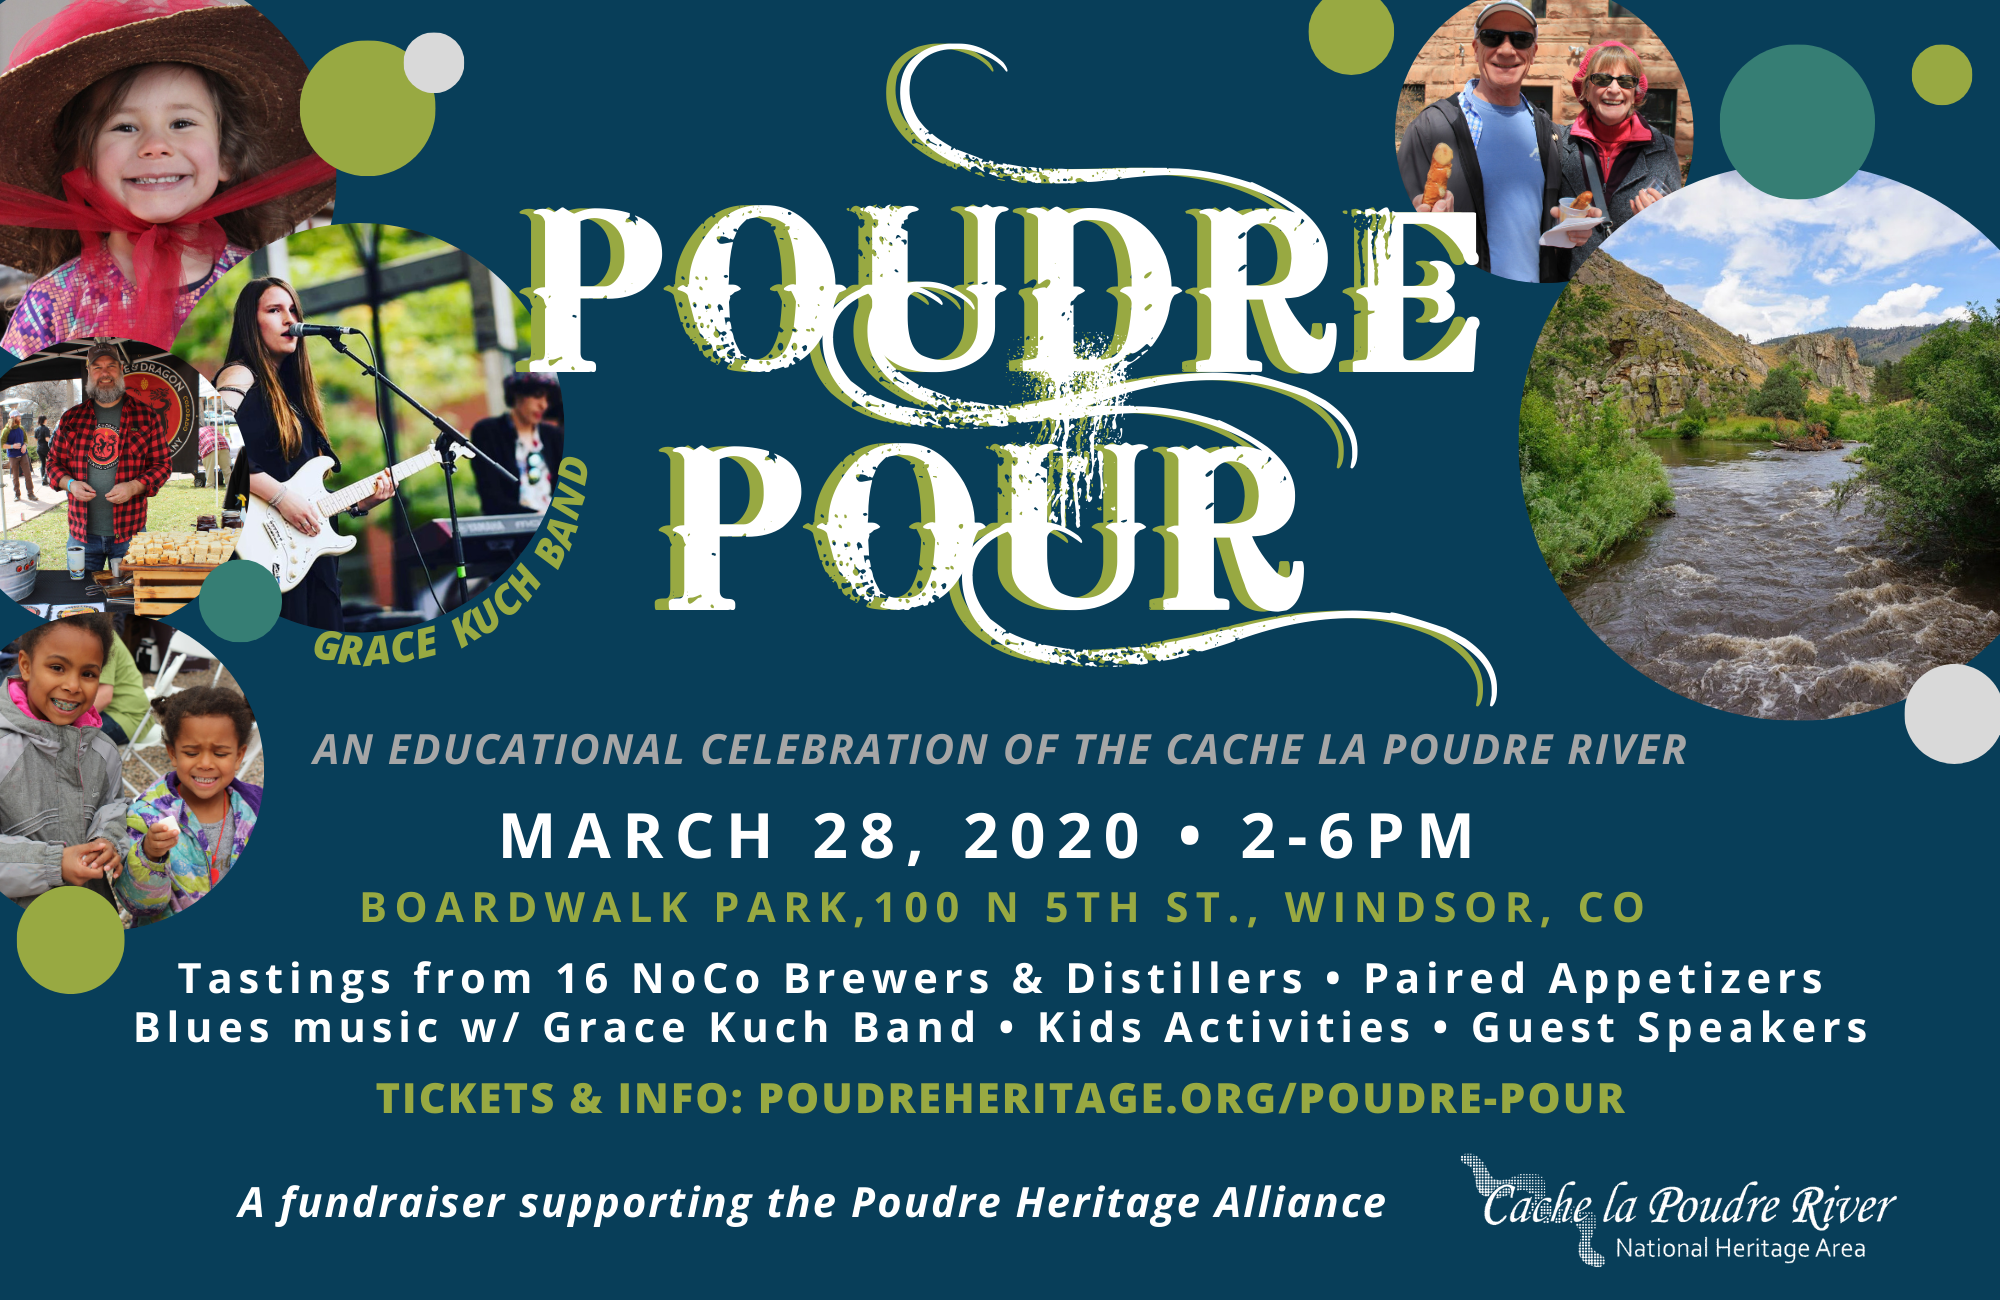 Poudre Heritage Alliance Hosting 3rd Annual Poudre Pour: An Educational Celebration of the Poudre River